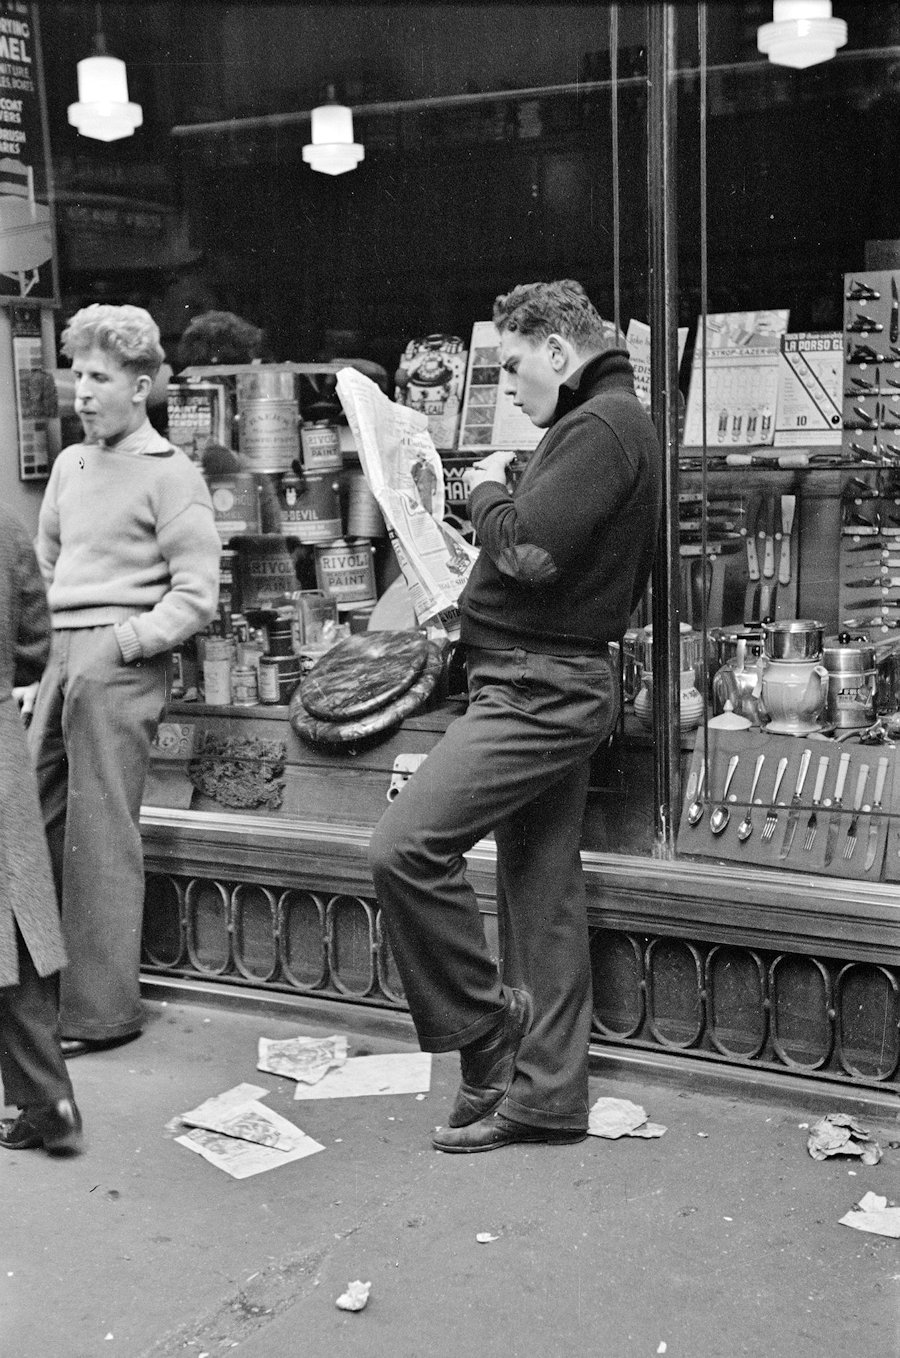 Teens hanging out in front of hardware store, NYC 1936.